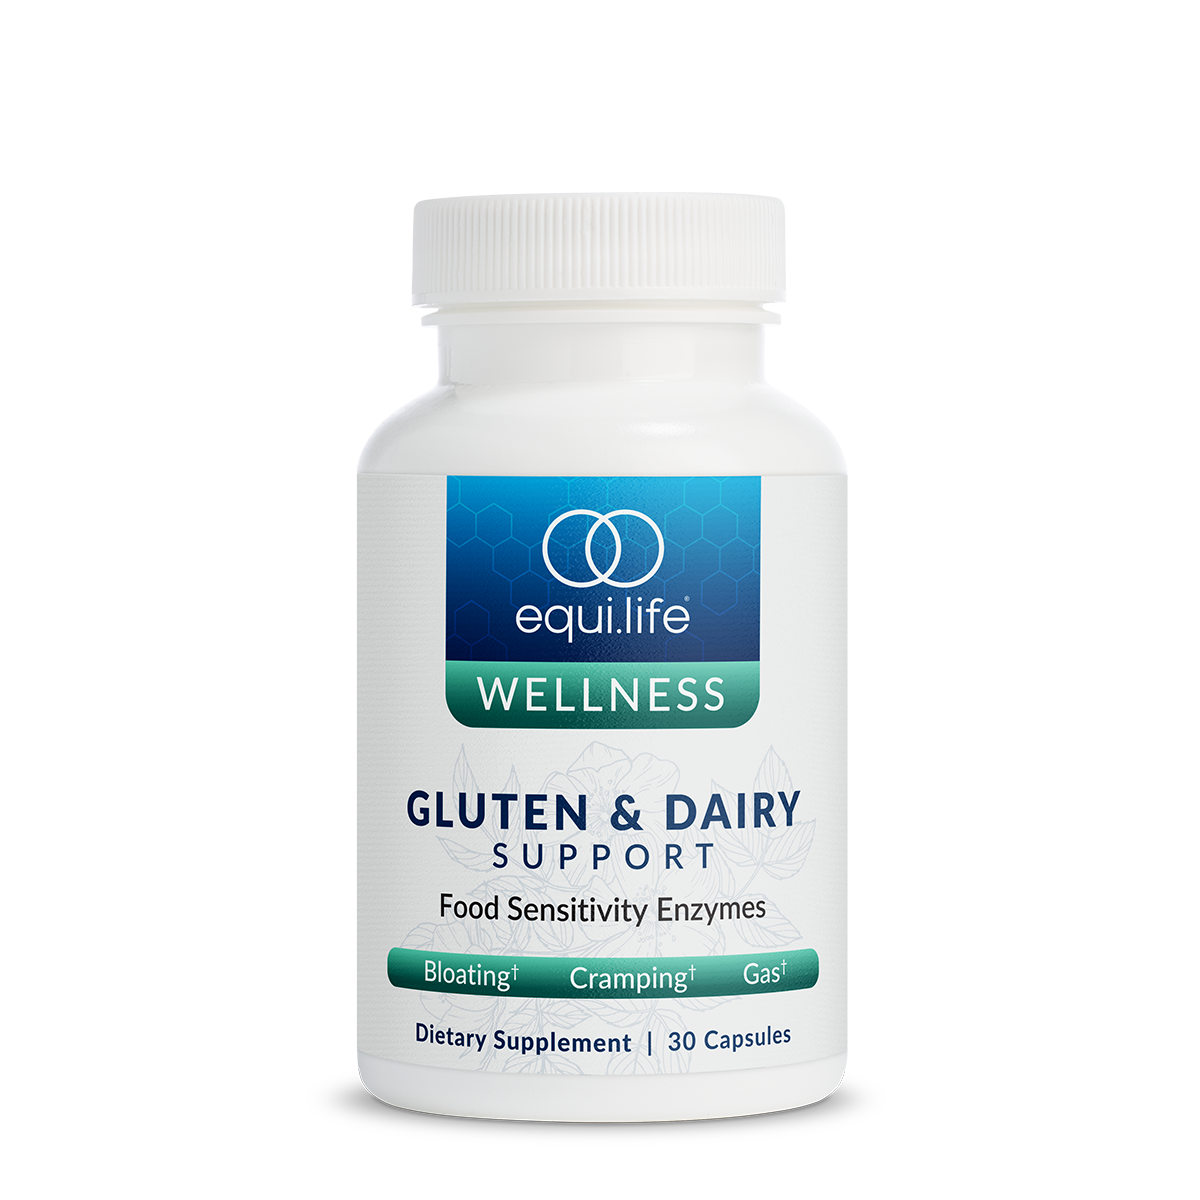 Gluten and Dairy Support Enzyme